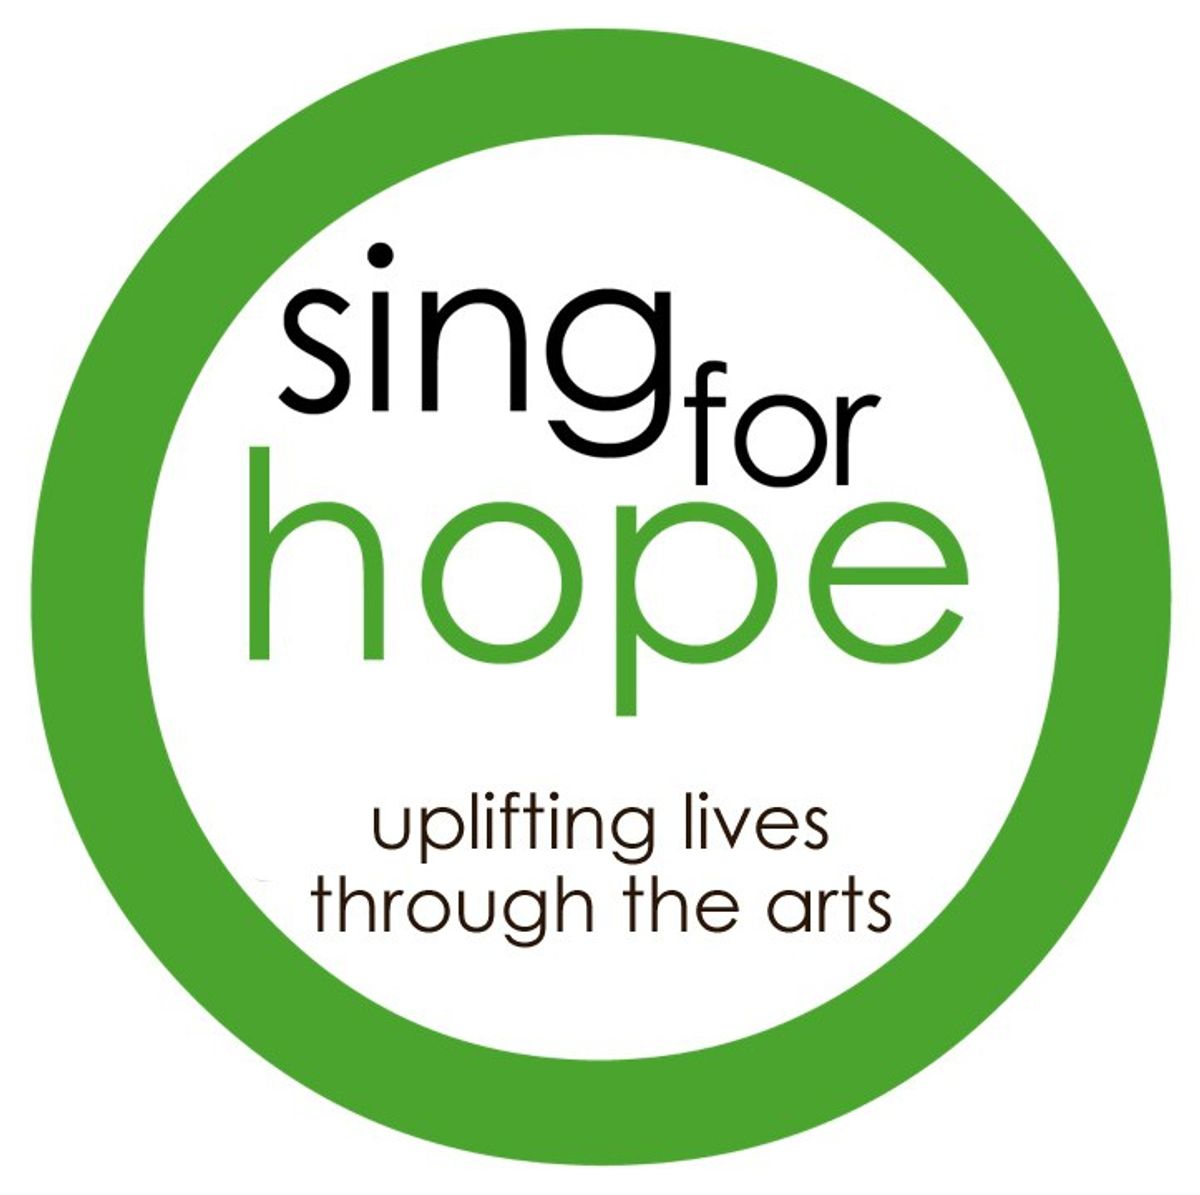 How 'Sing for Hope' Unites The Arts